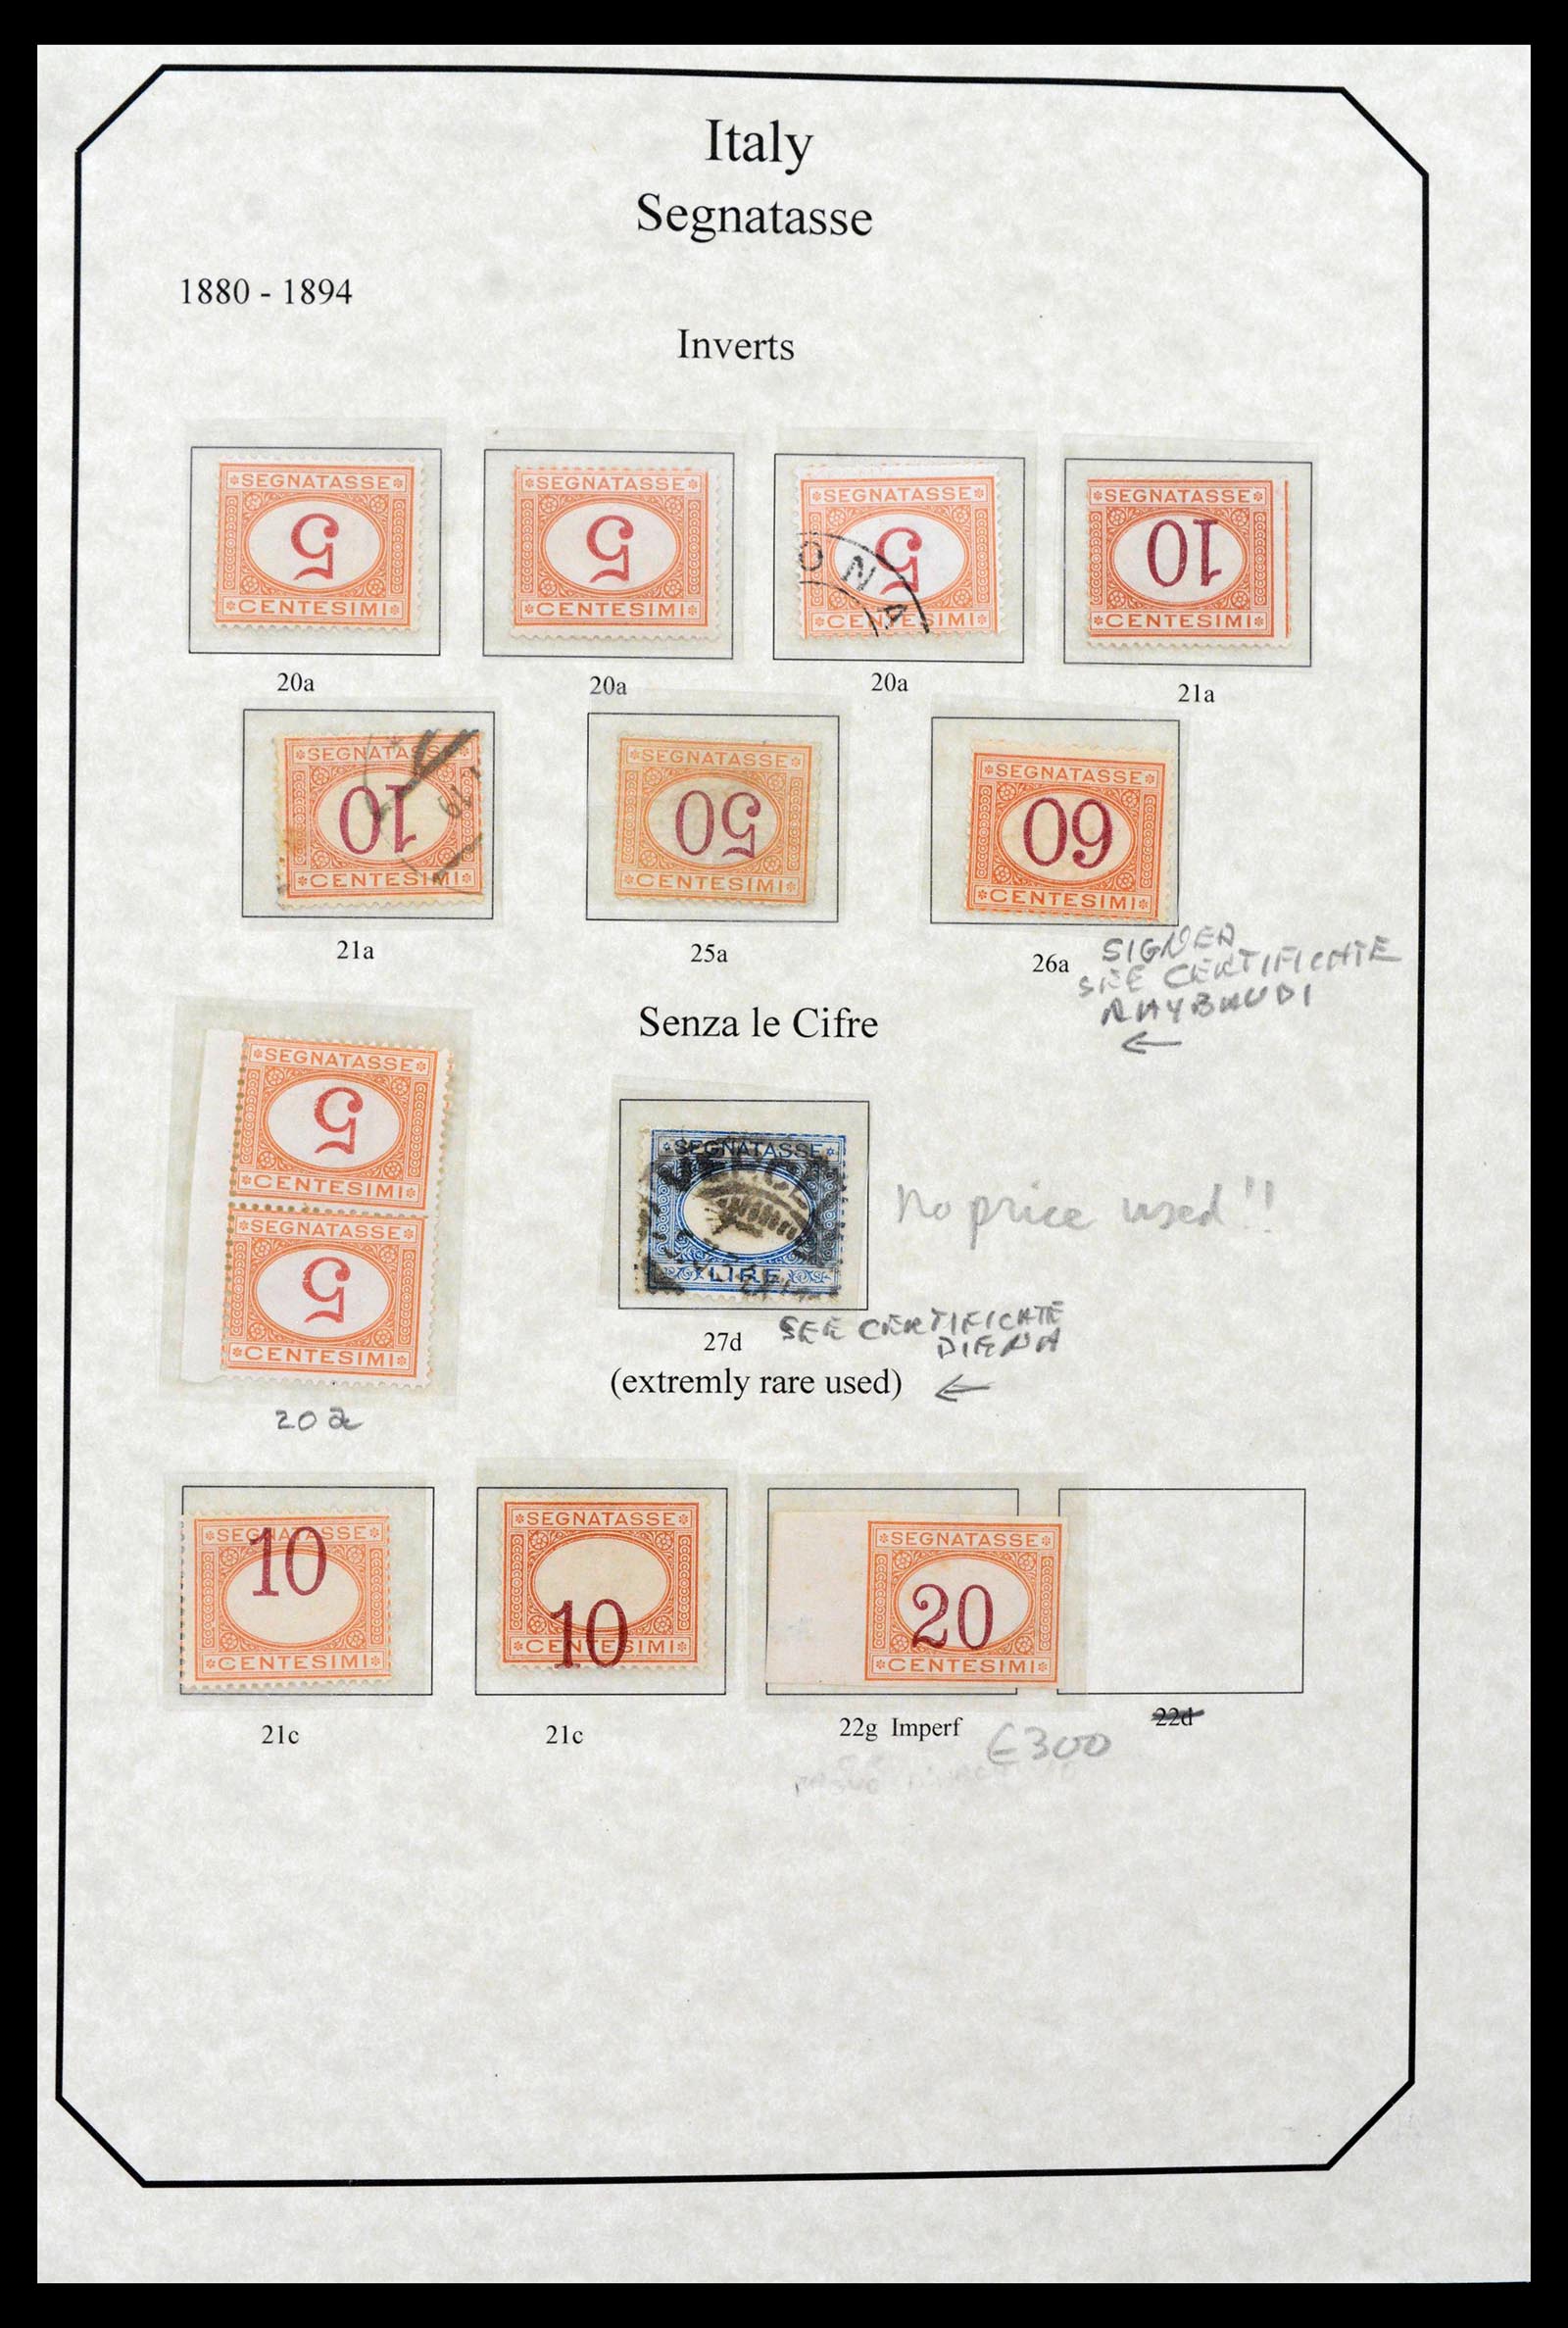 39022 0008 - Stamp collection 39022 Italy postage dues 1861-2000.